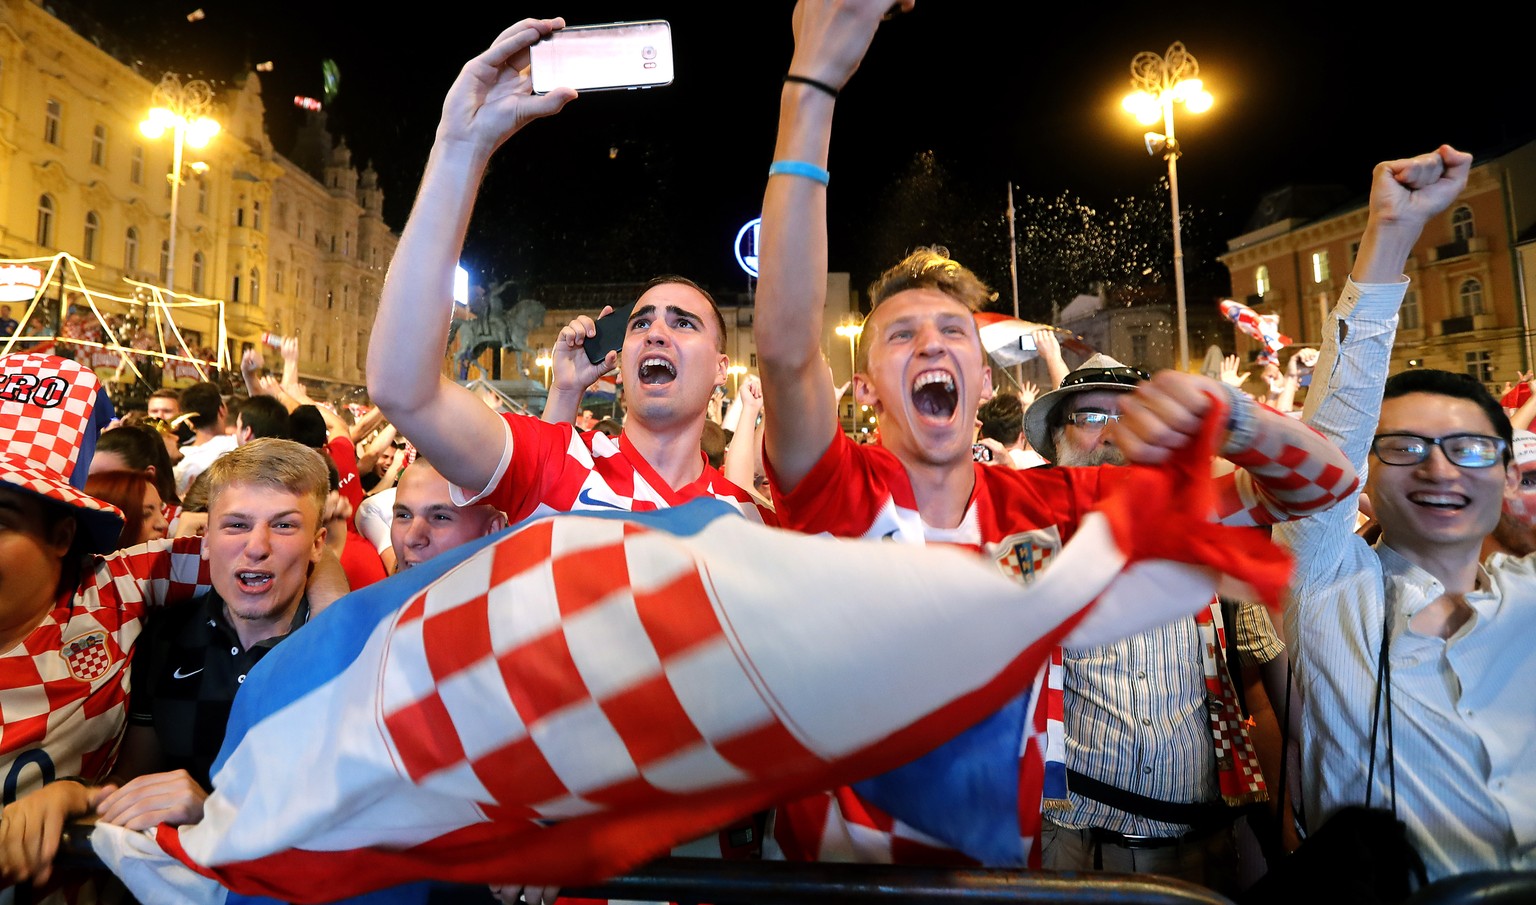 epa06814542 Croatian national soccer team fans celebrate winning he FIFA World Cup 2018 group D preliminary round soccer match between Croatia and Nigeria in downtown Zagreb, Croatia, 16 June 2018. EP ...